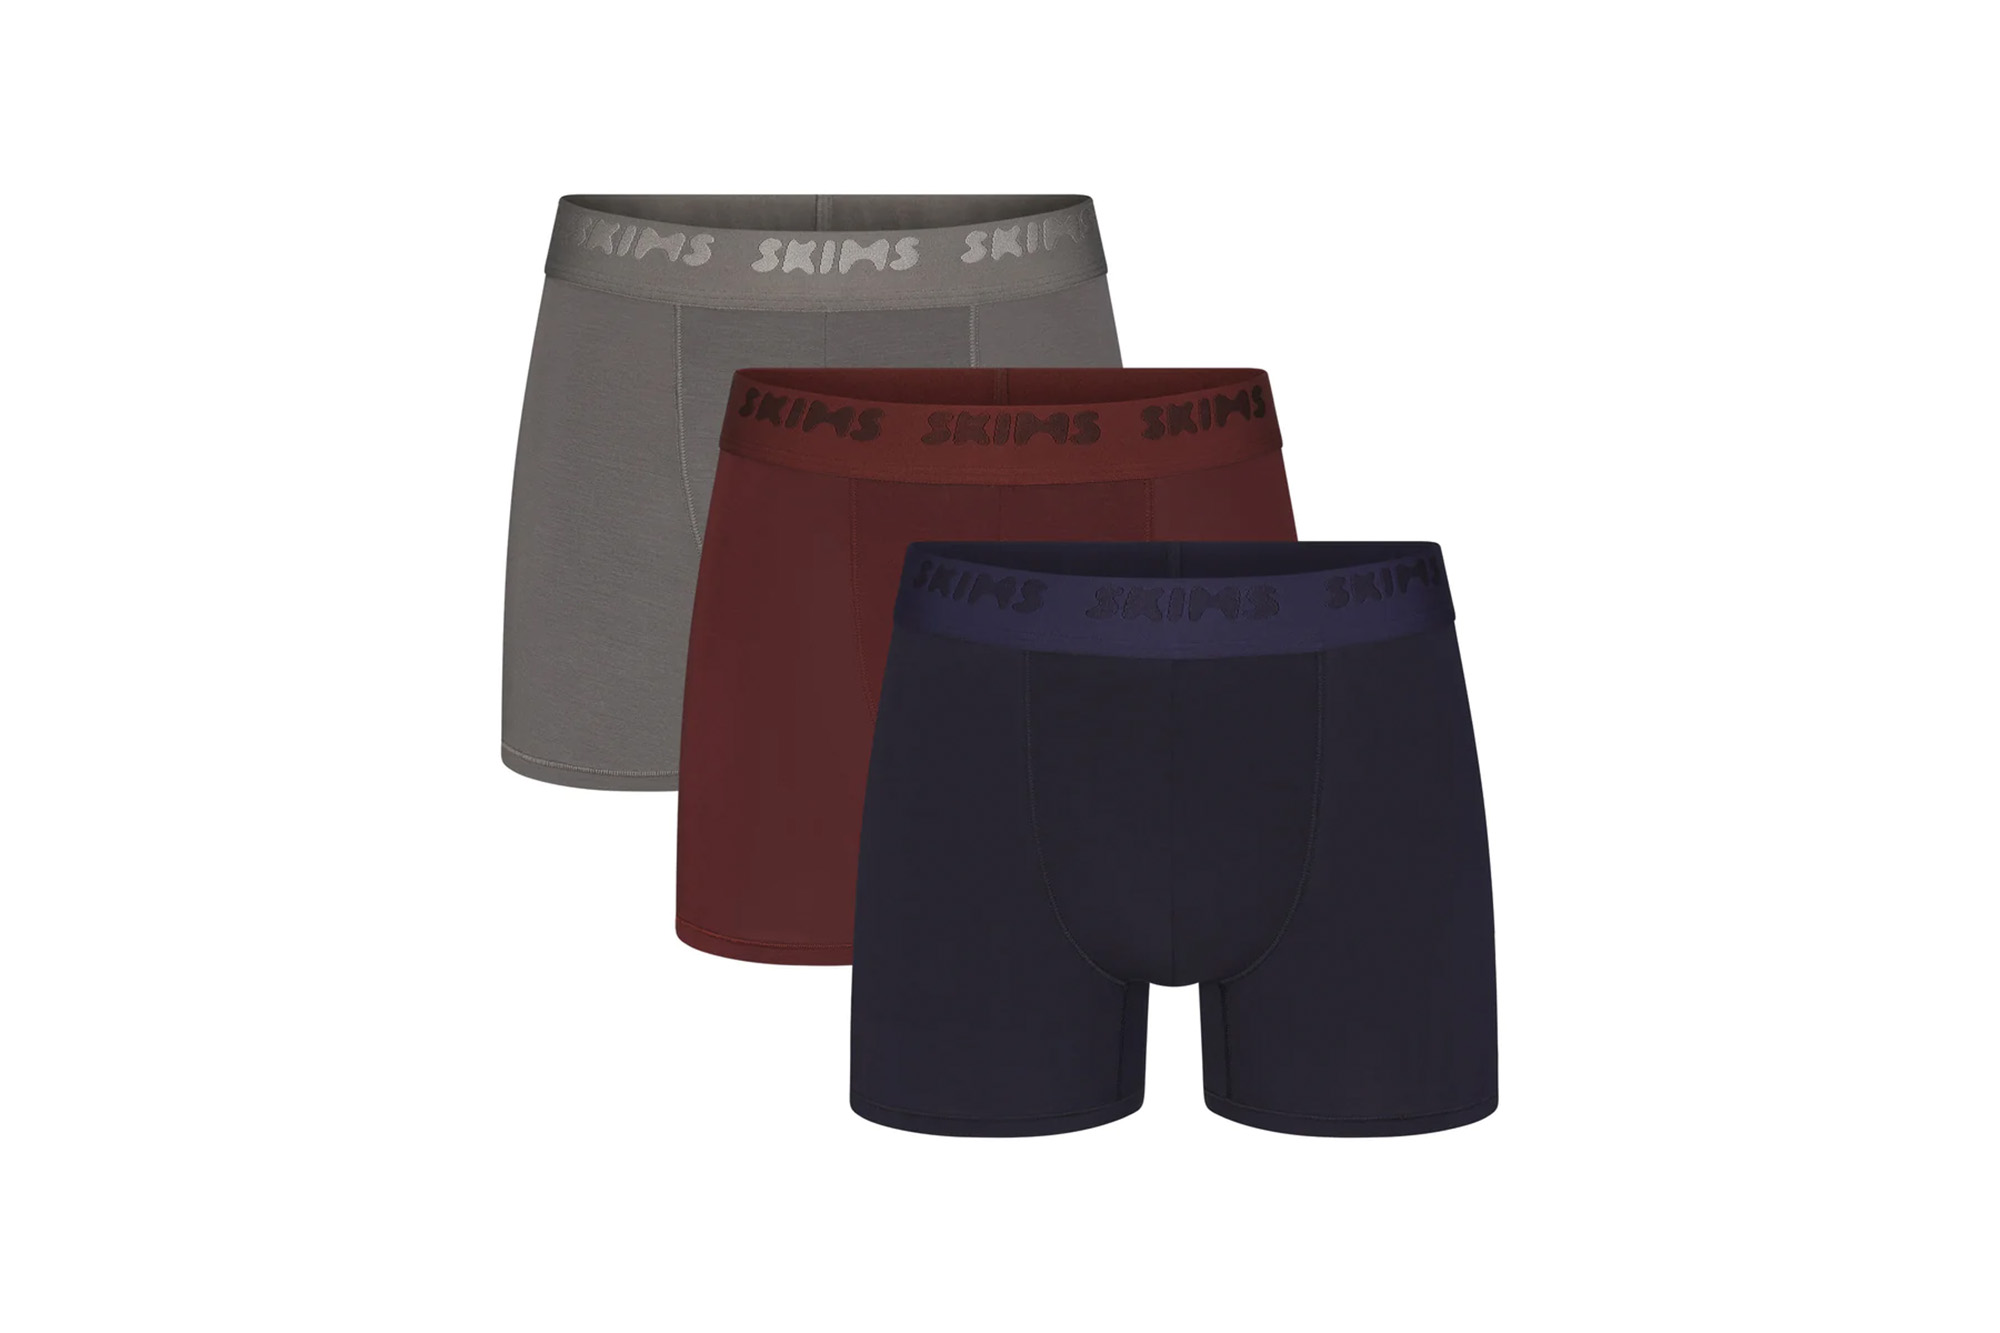 A 3-pack of men's boxers